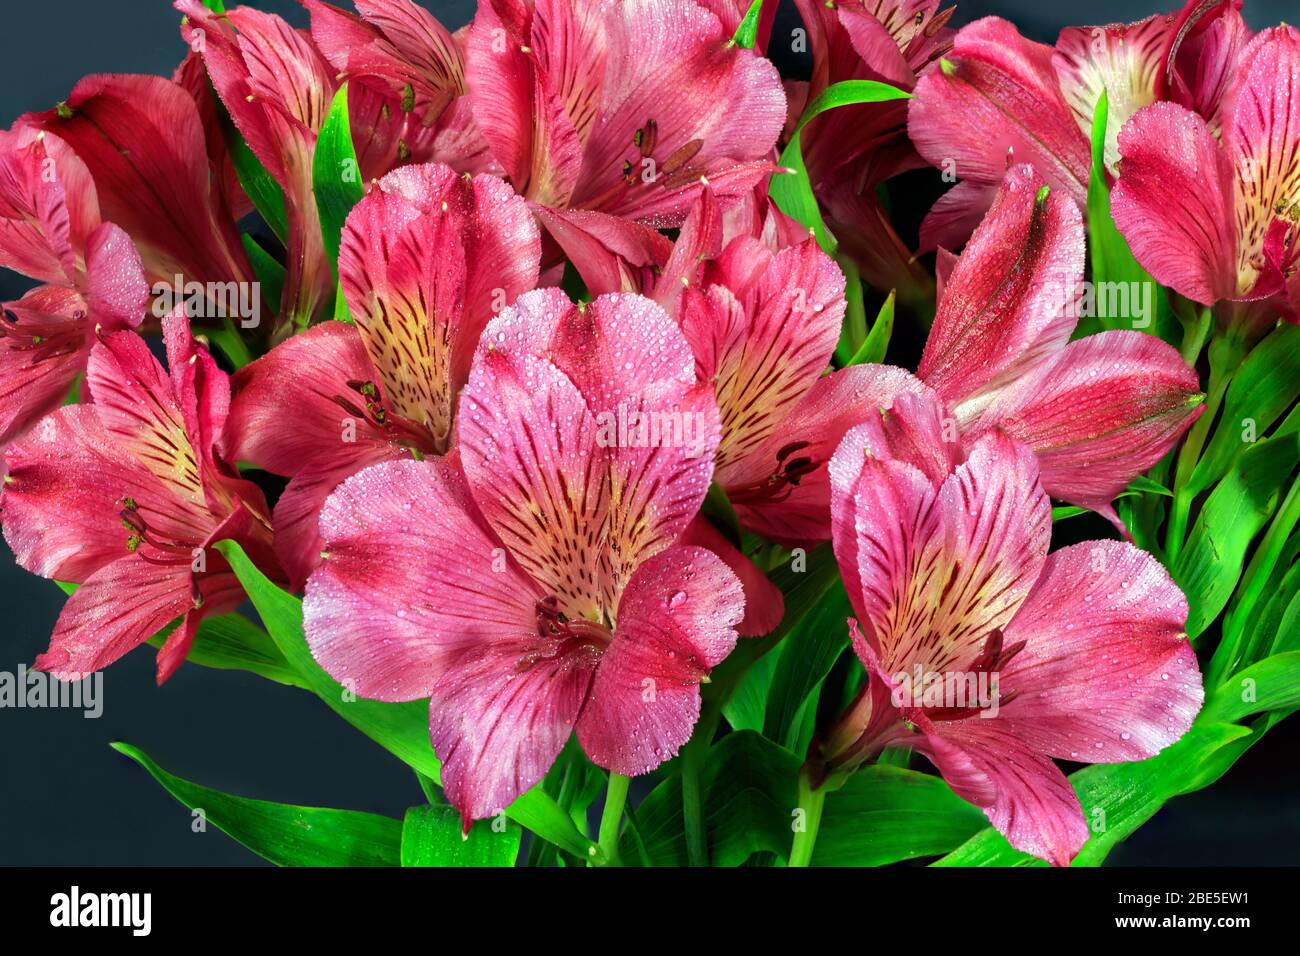 Close up on red Alstroemeria flower heads with water droplets with a black background Stock Photo